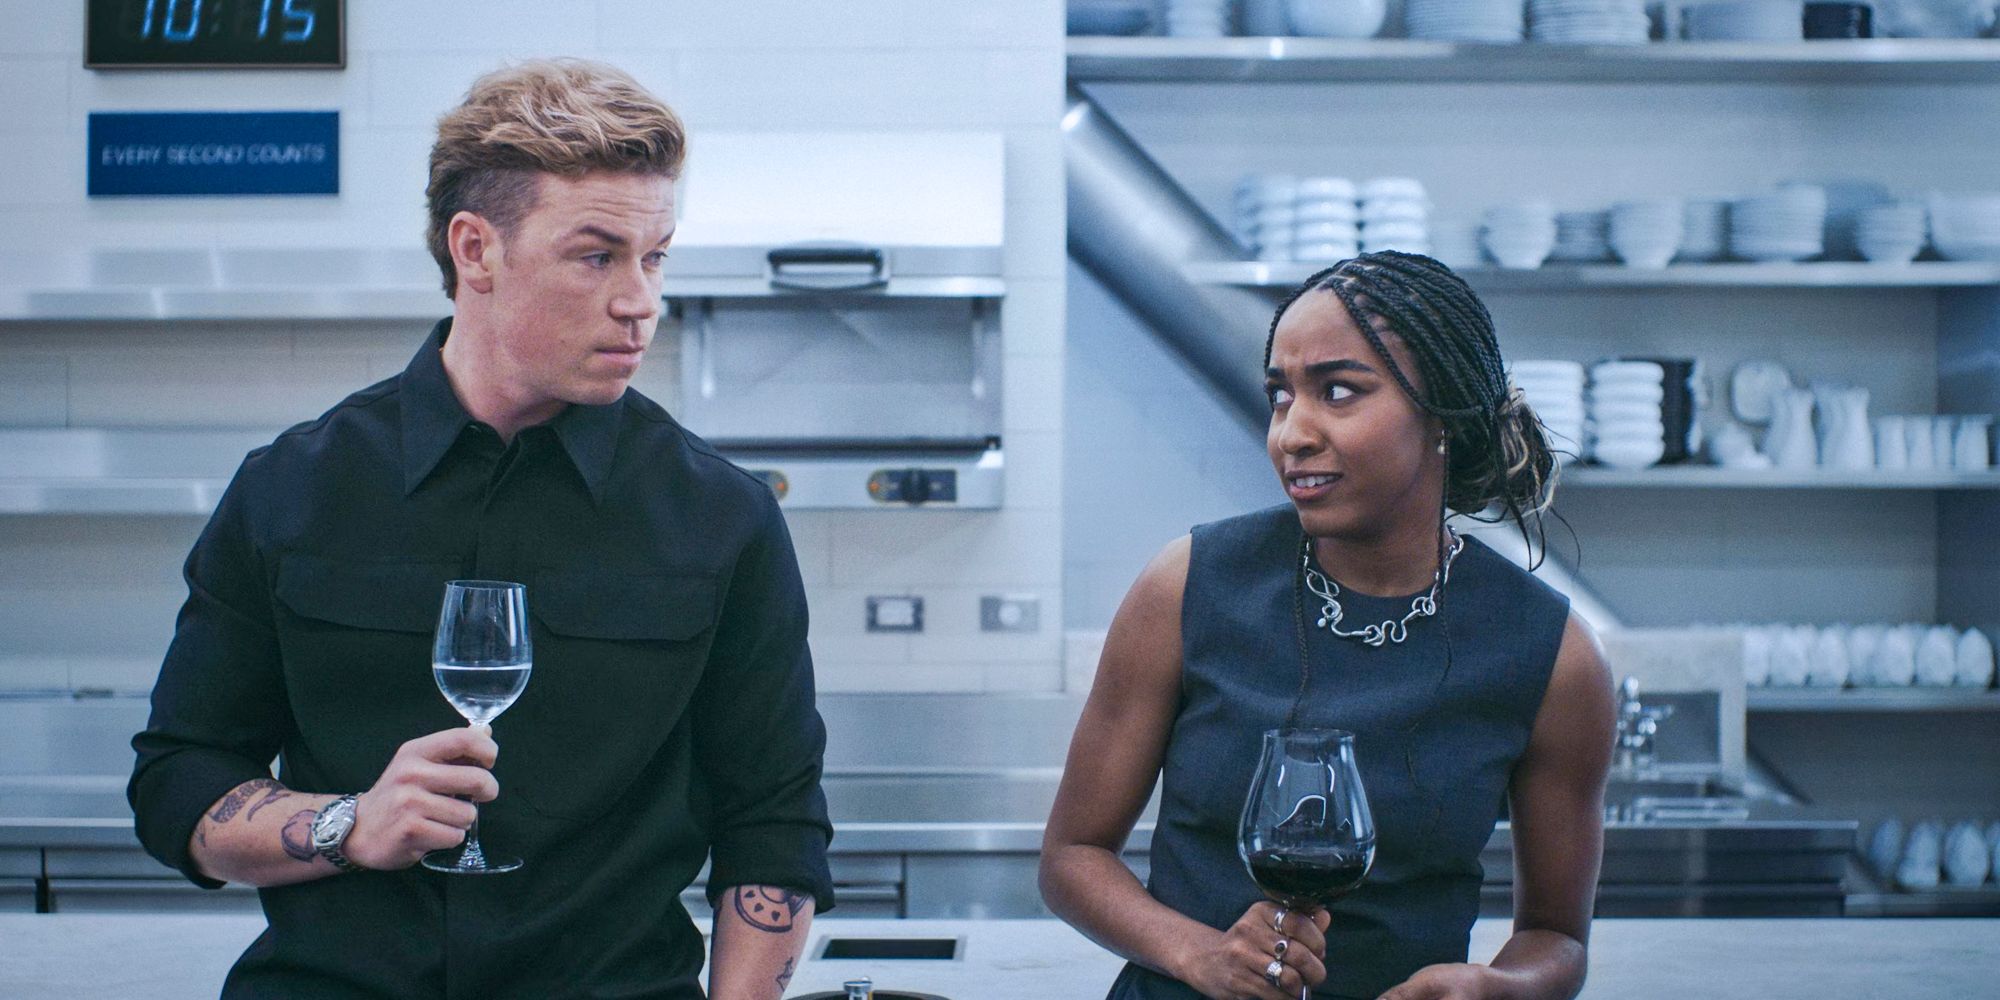 Chef Luca (Will Poulter) asking awkward questions to Sydney (Ayo Edebiri) in The Bear Season 3 Episode 10